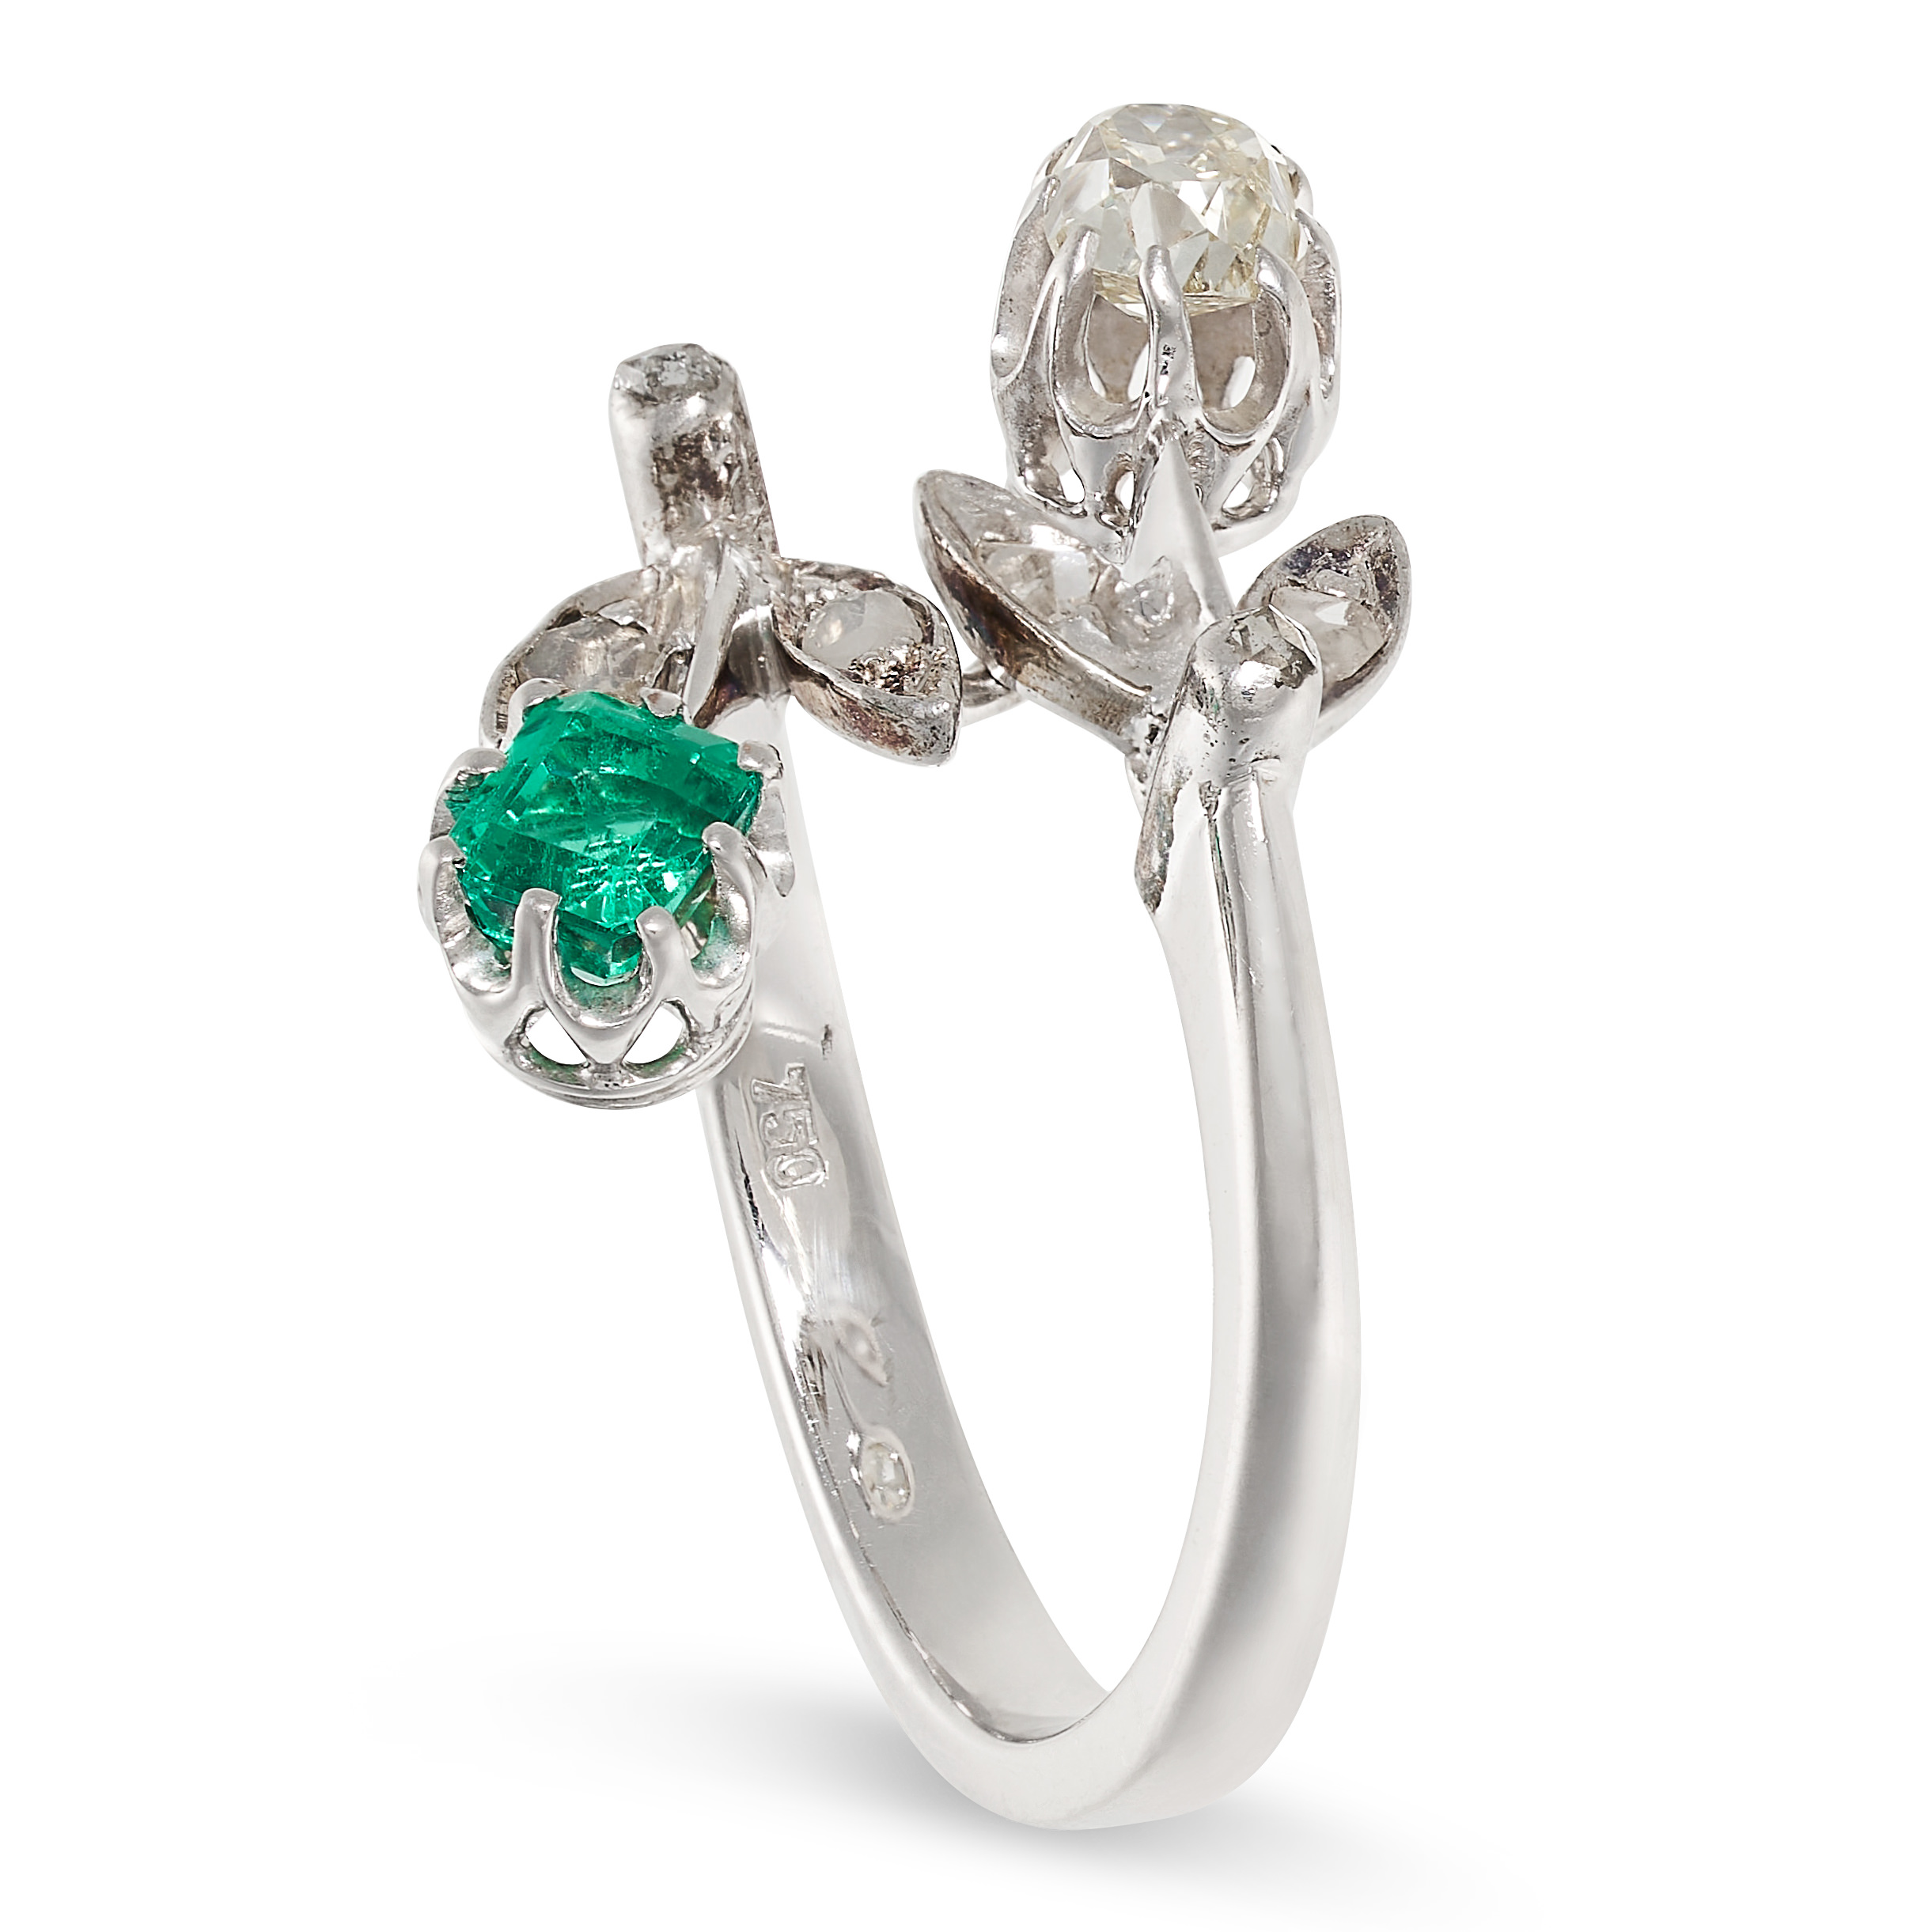 AN EMERALD AND DIAMOND RING in 18ct white gold, in foliate design, set with a step cut emerald of - Image 2 of 2